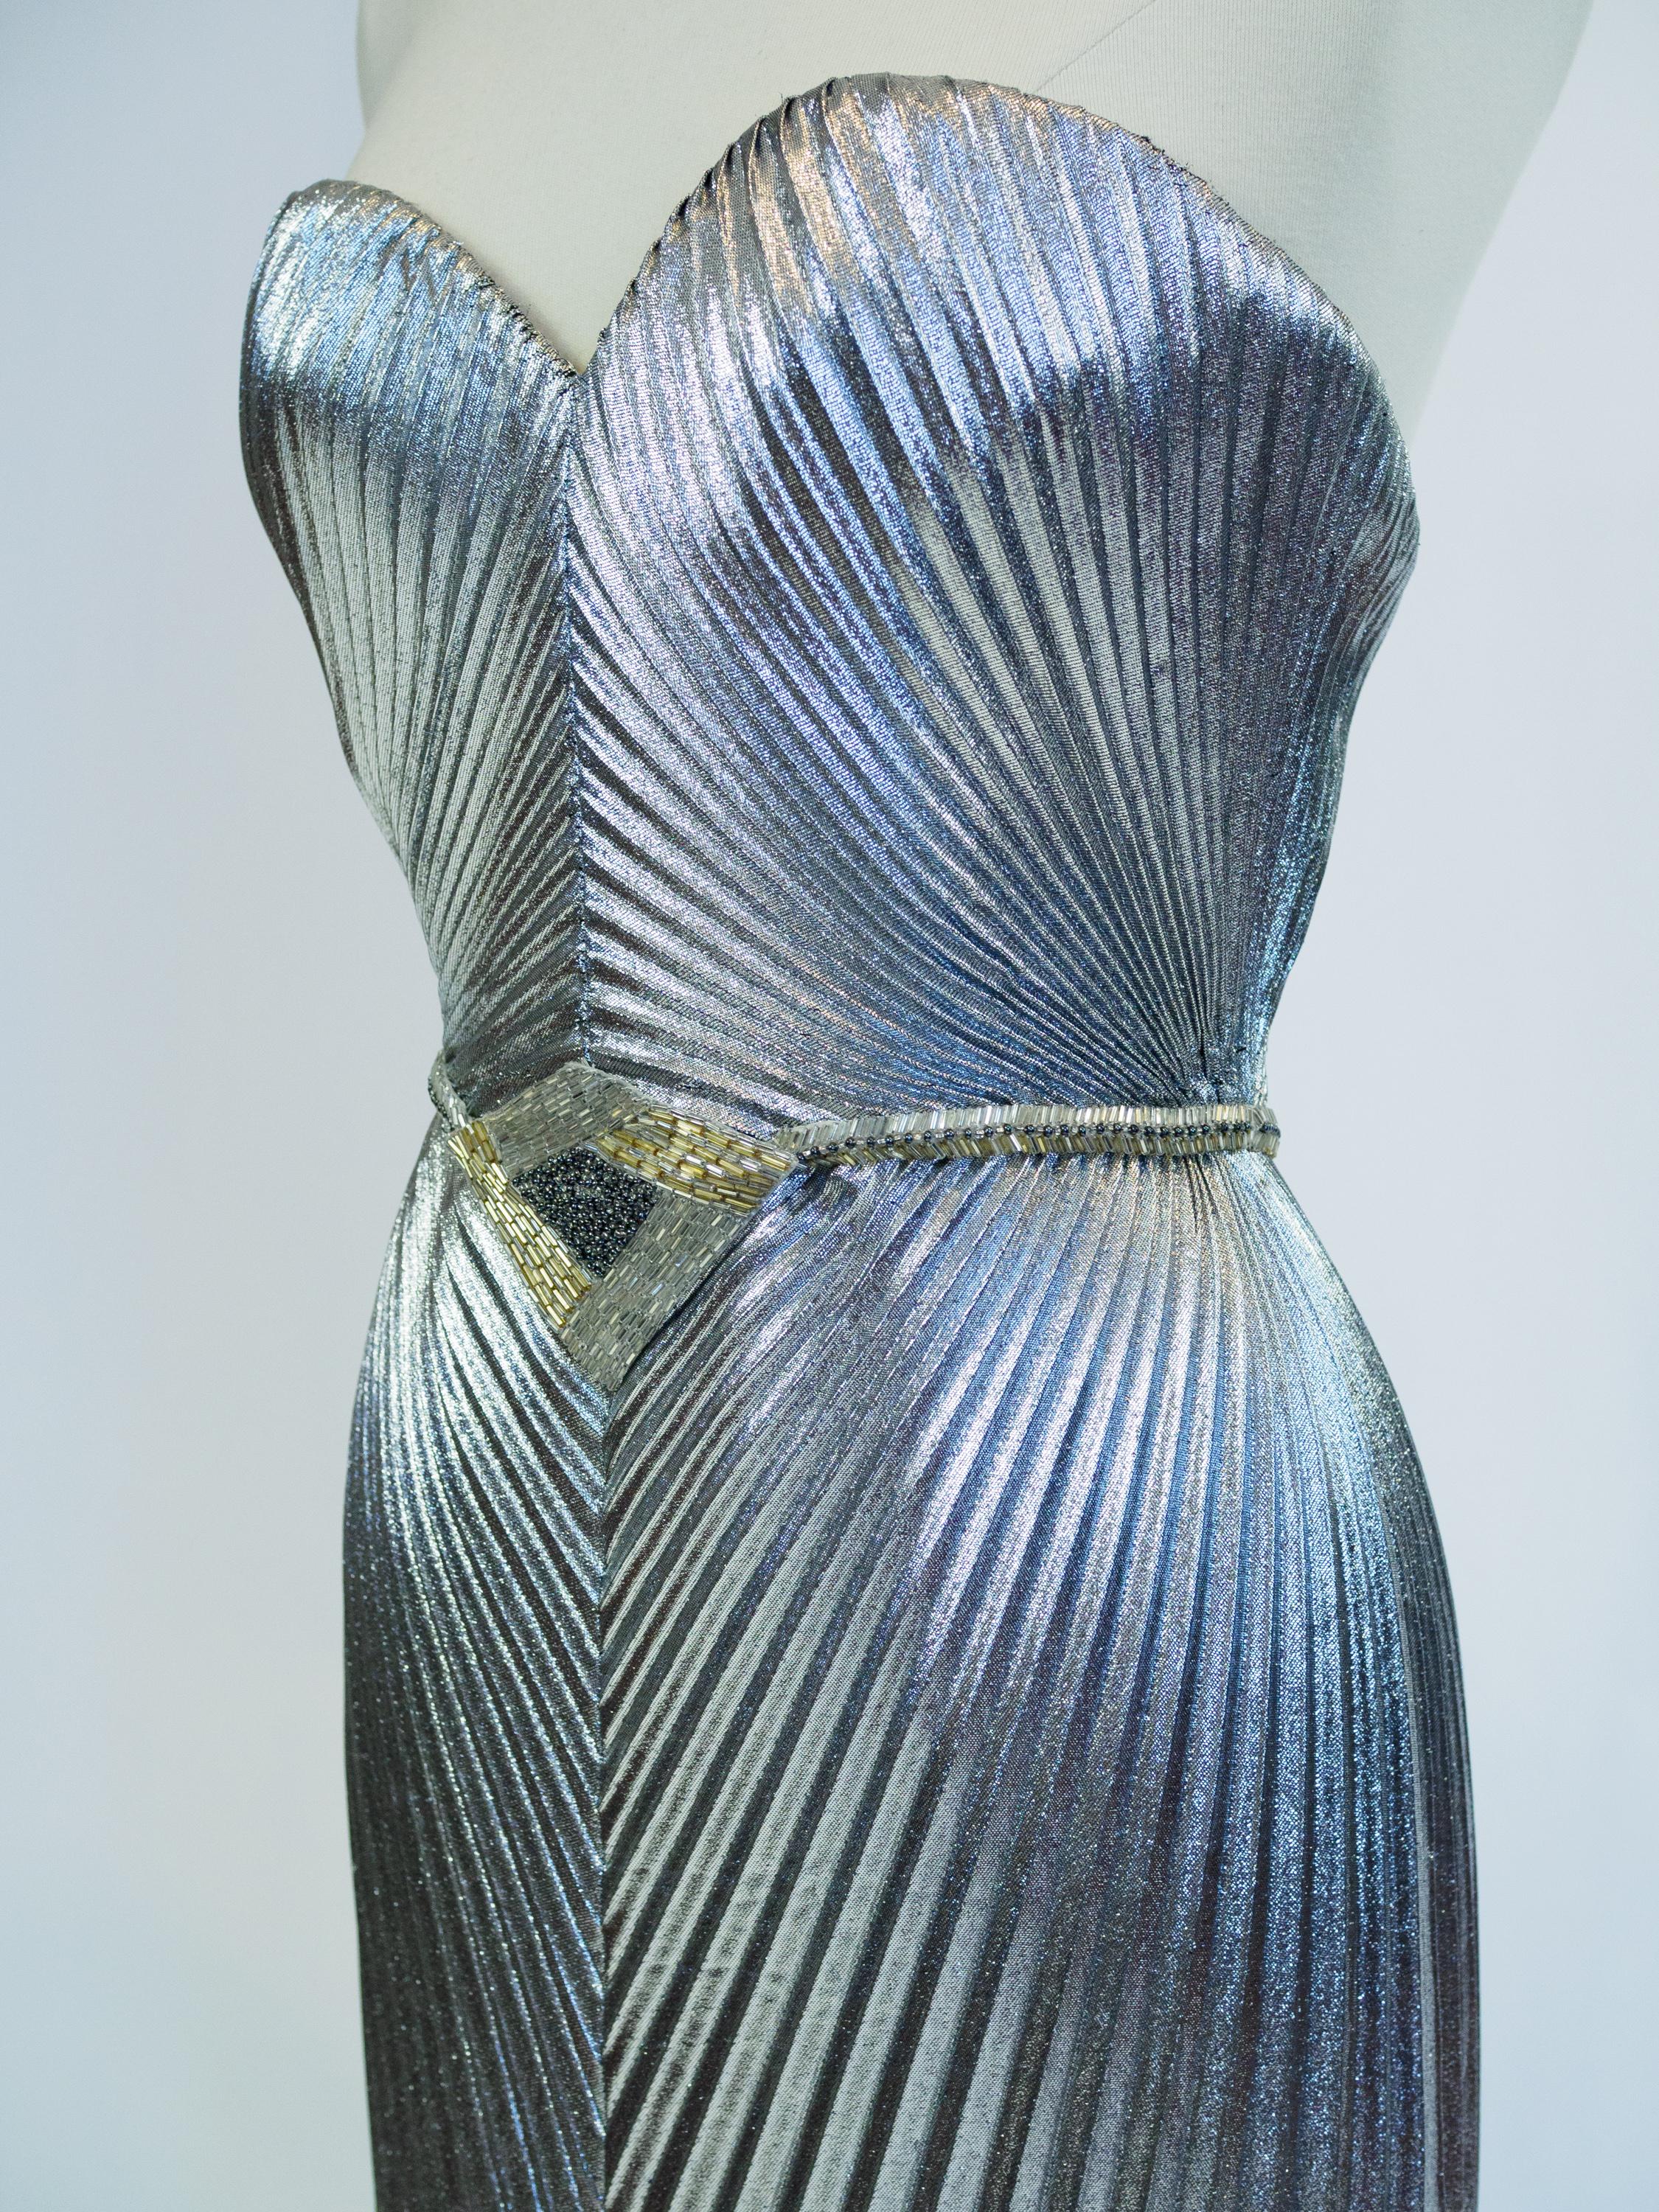 Circa 1980

France

Impressive evening dress in sun pleats and silver lamé by Loris Azzaro Haute Couture from the 1980s. Bodycon dress with large open back neckline and zipper in the back. Internal boned bustier with integrated bra with padded cups.